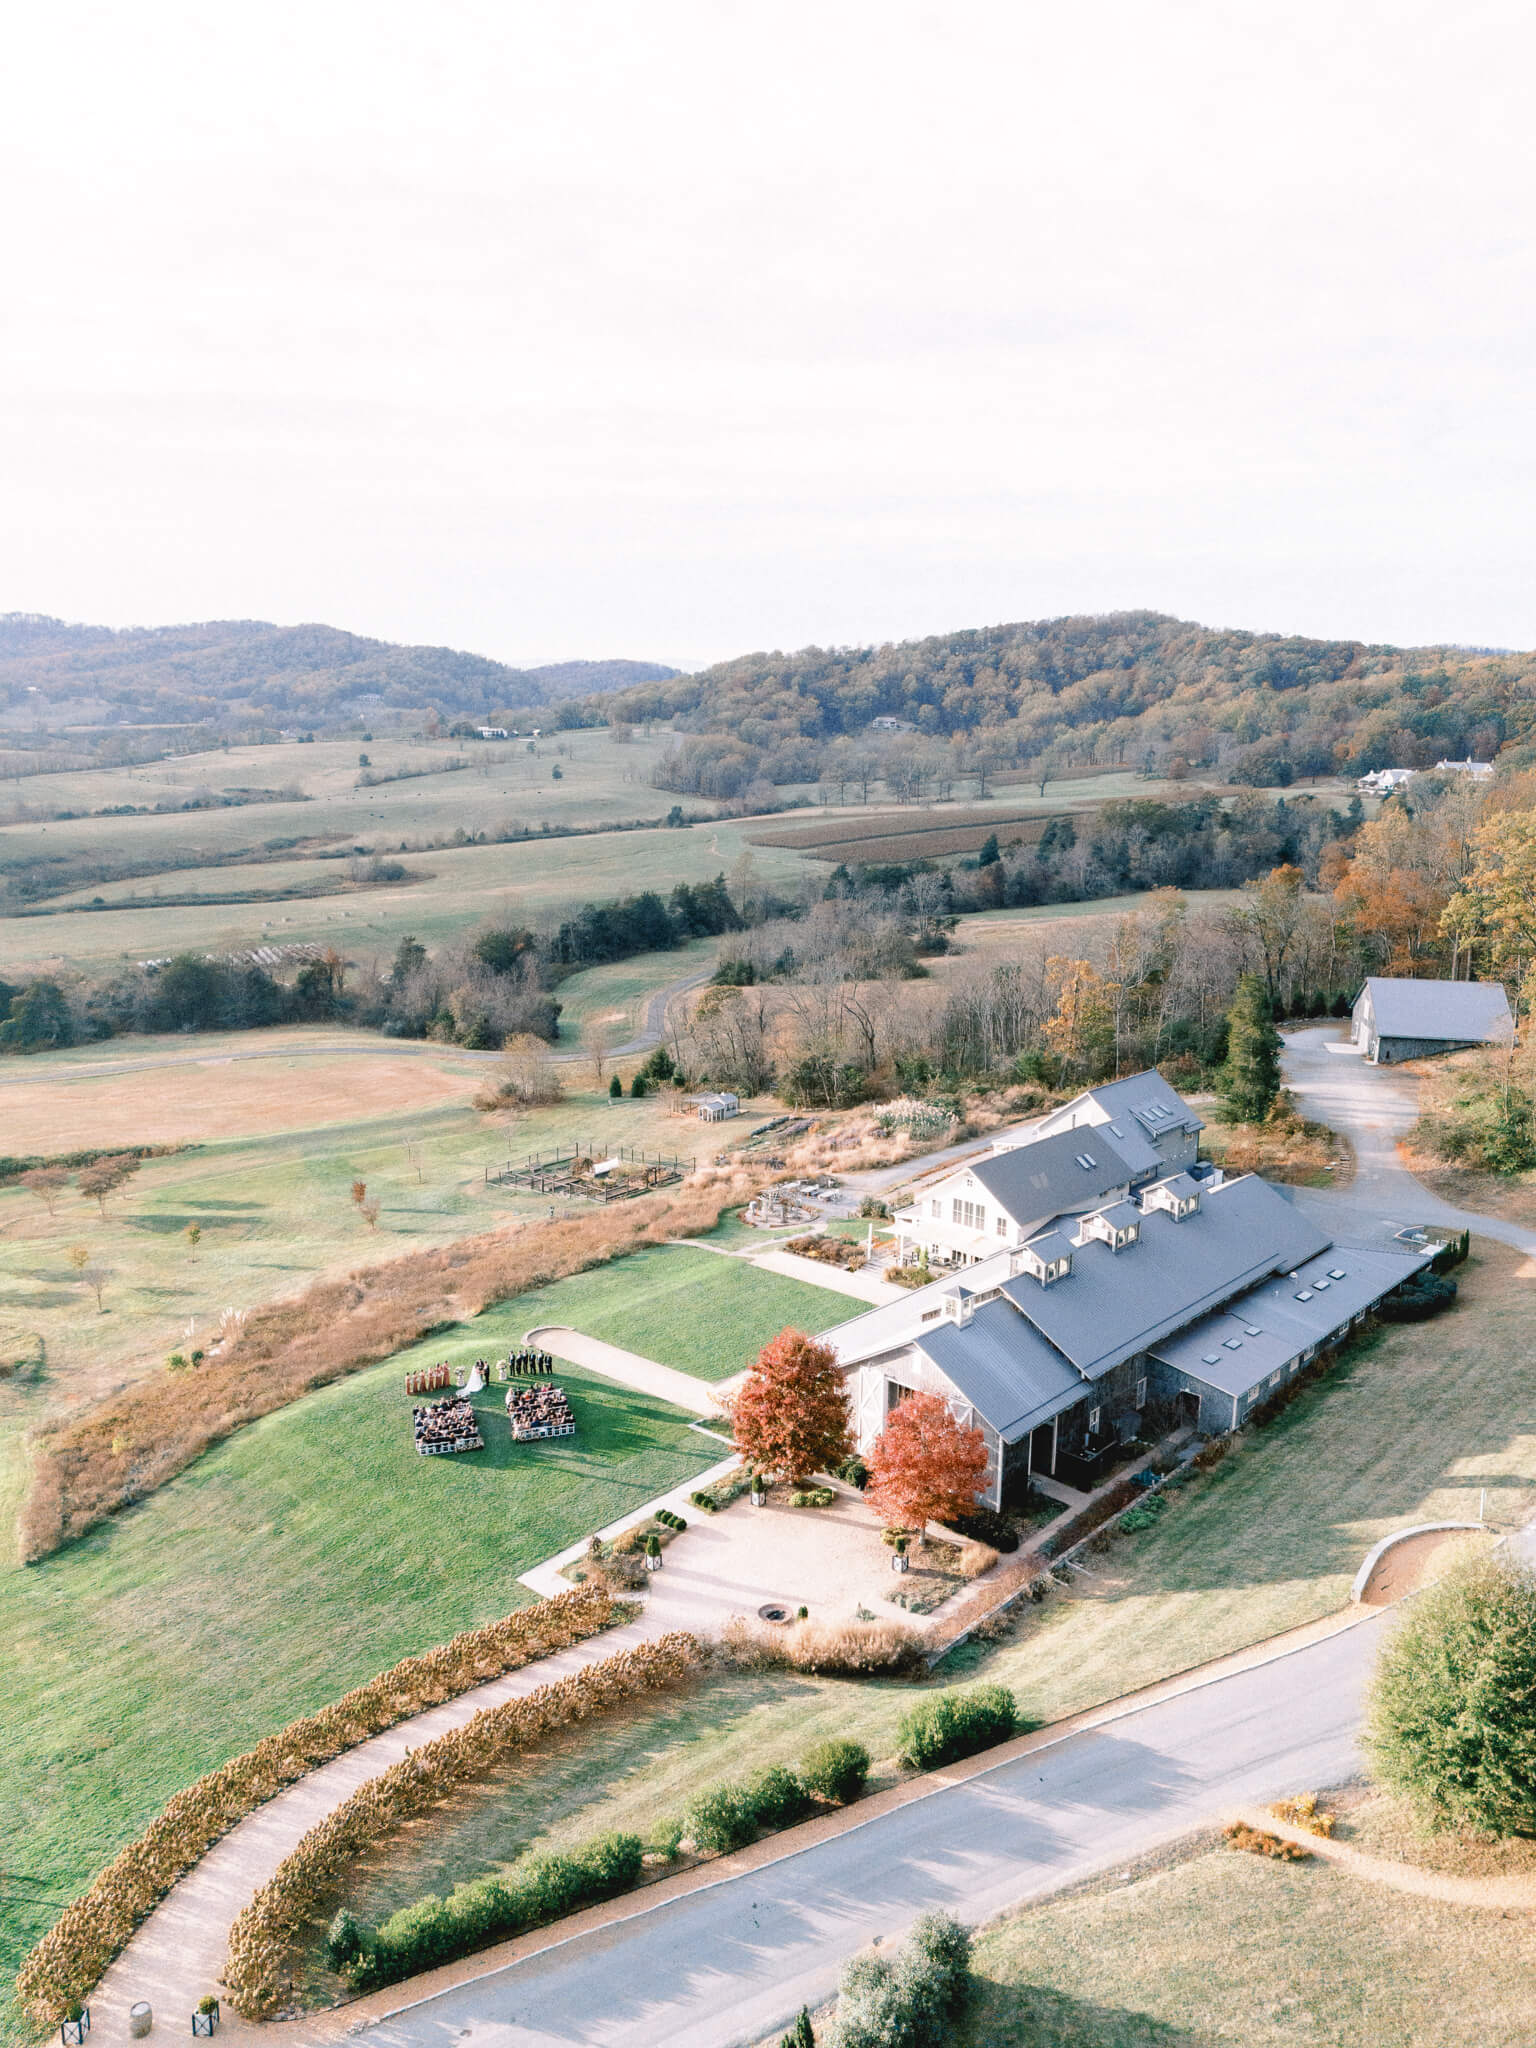 Drone view of Pippin Hill wedding venue during a ceremony.